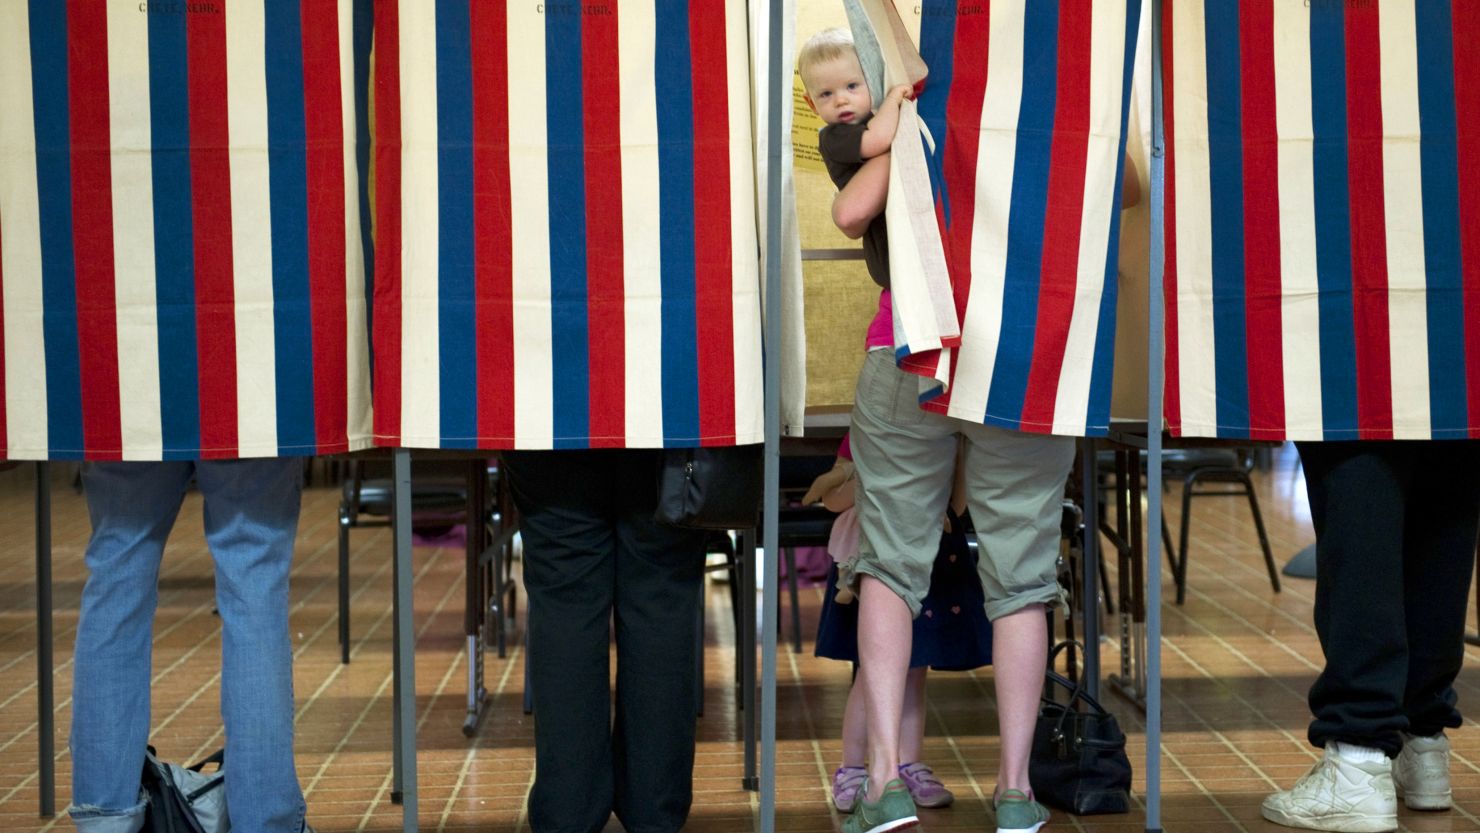 A possible future voter peeks out of the booth while his mother casts a ballot in a 2012 election in Metamora, Illinois.